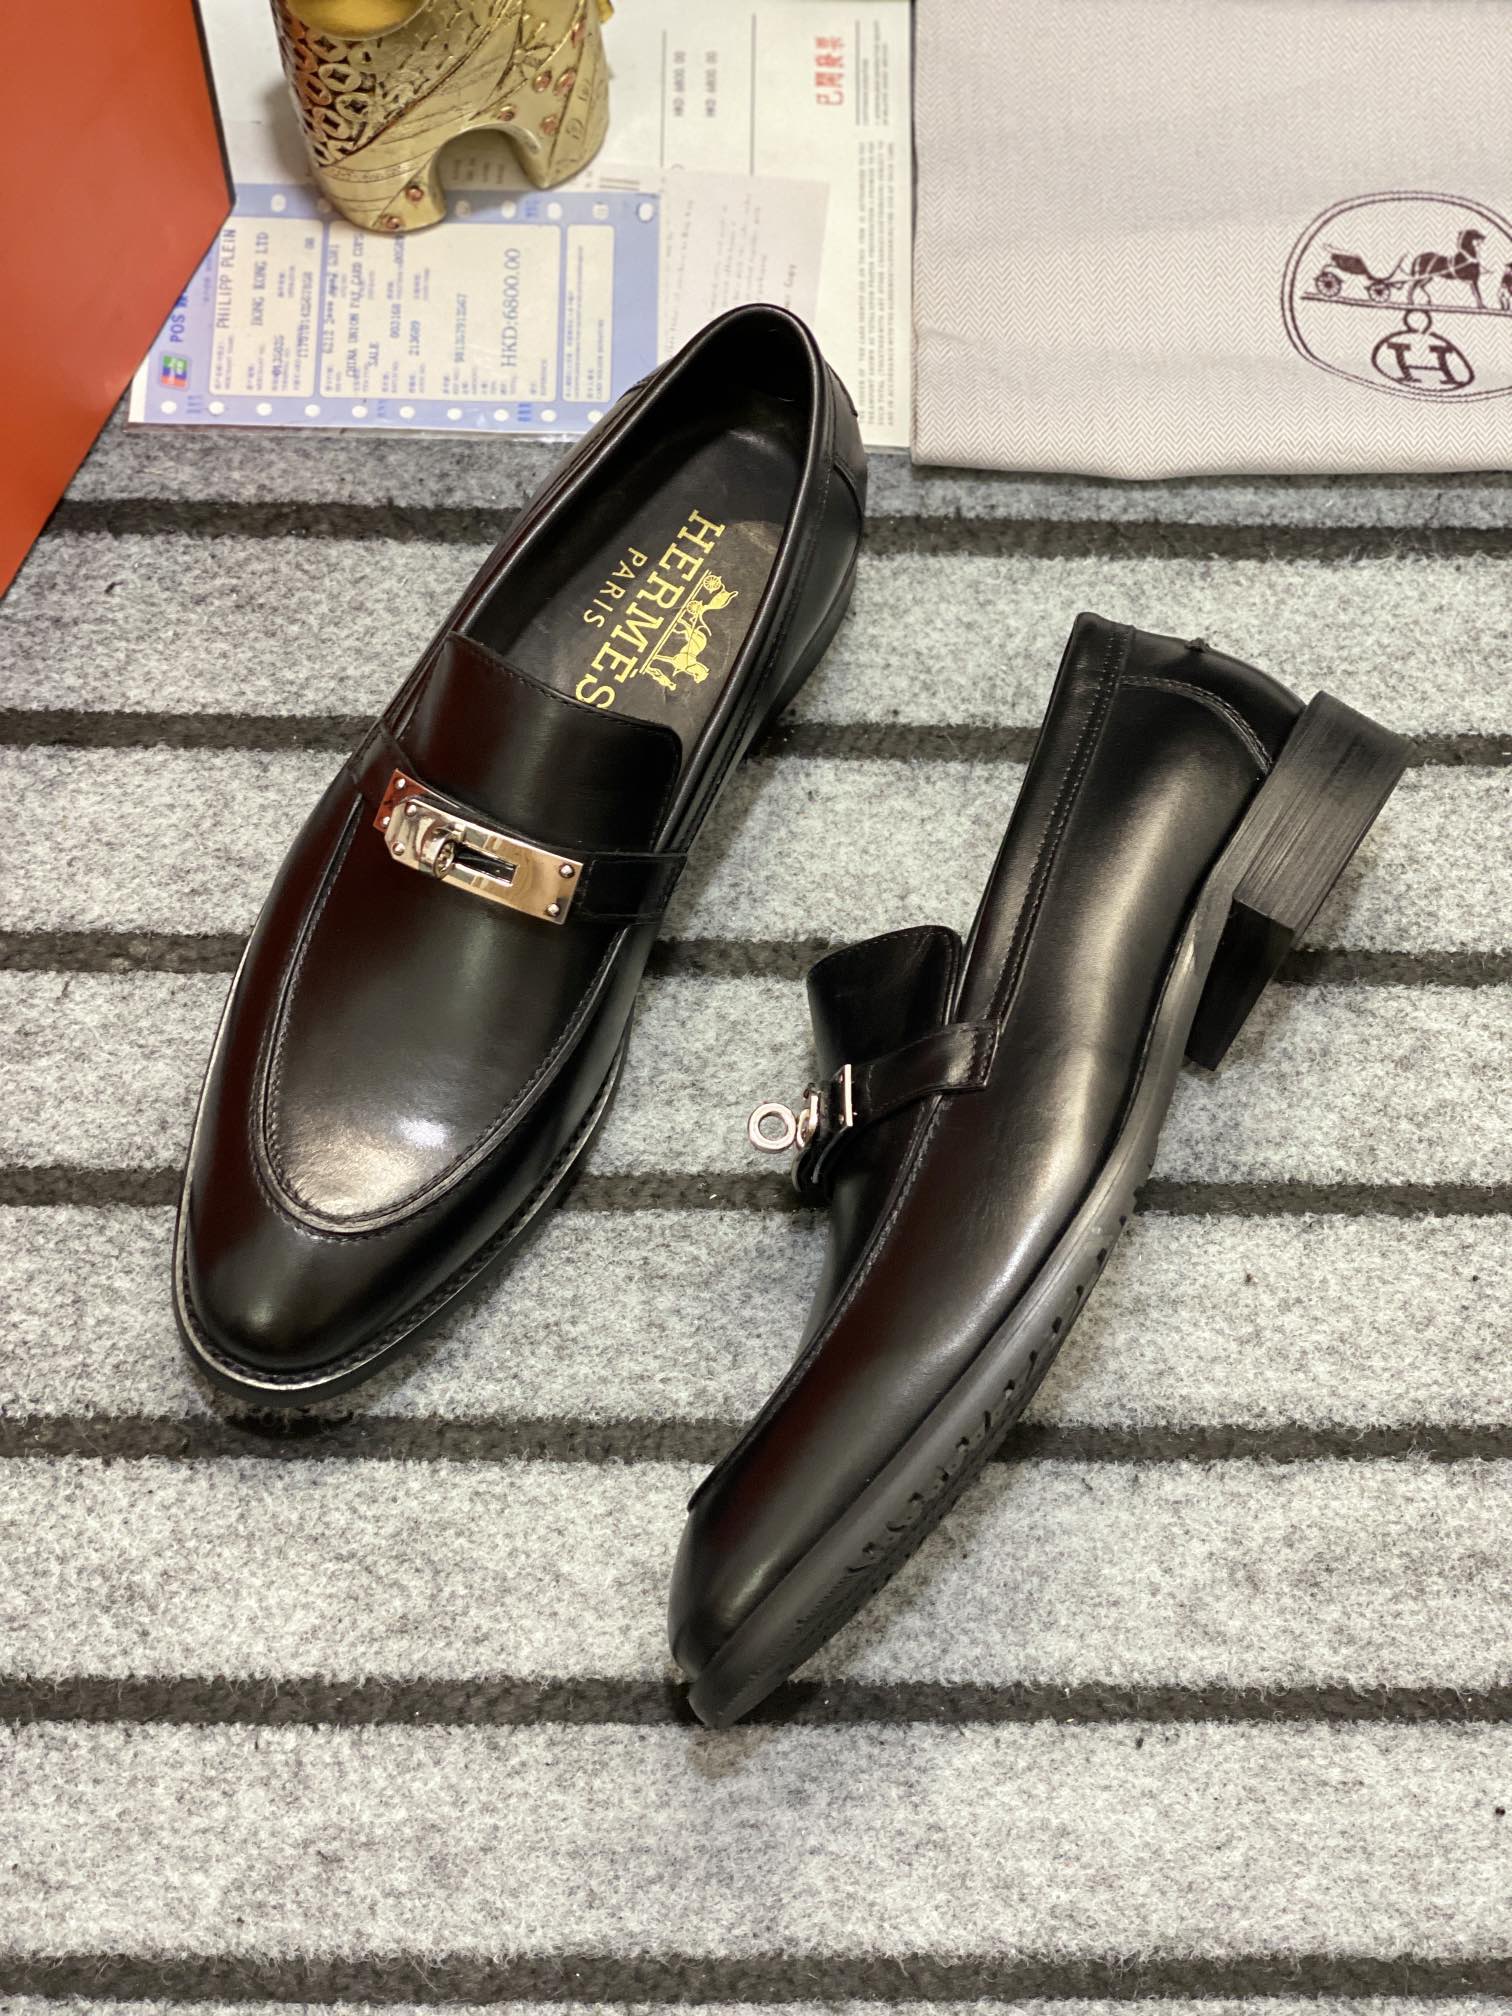 HERMES————Top-grade cattle goods 1720260 Size: 38-44 (45 customized TTS) HERMES top-grade cattle goo